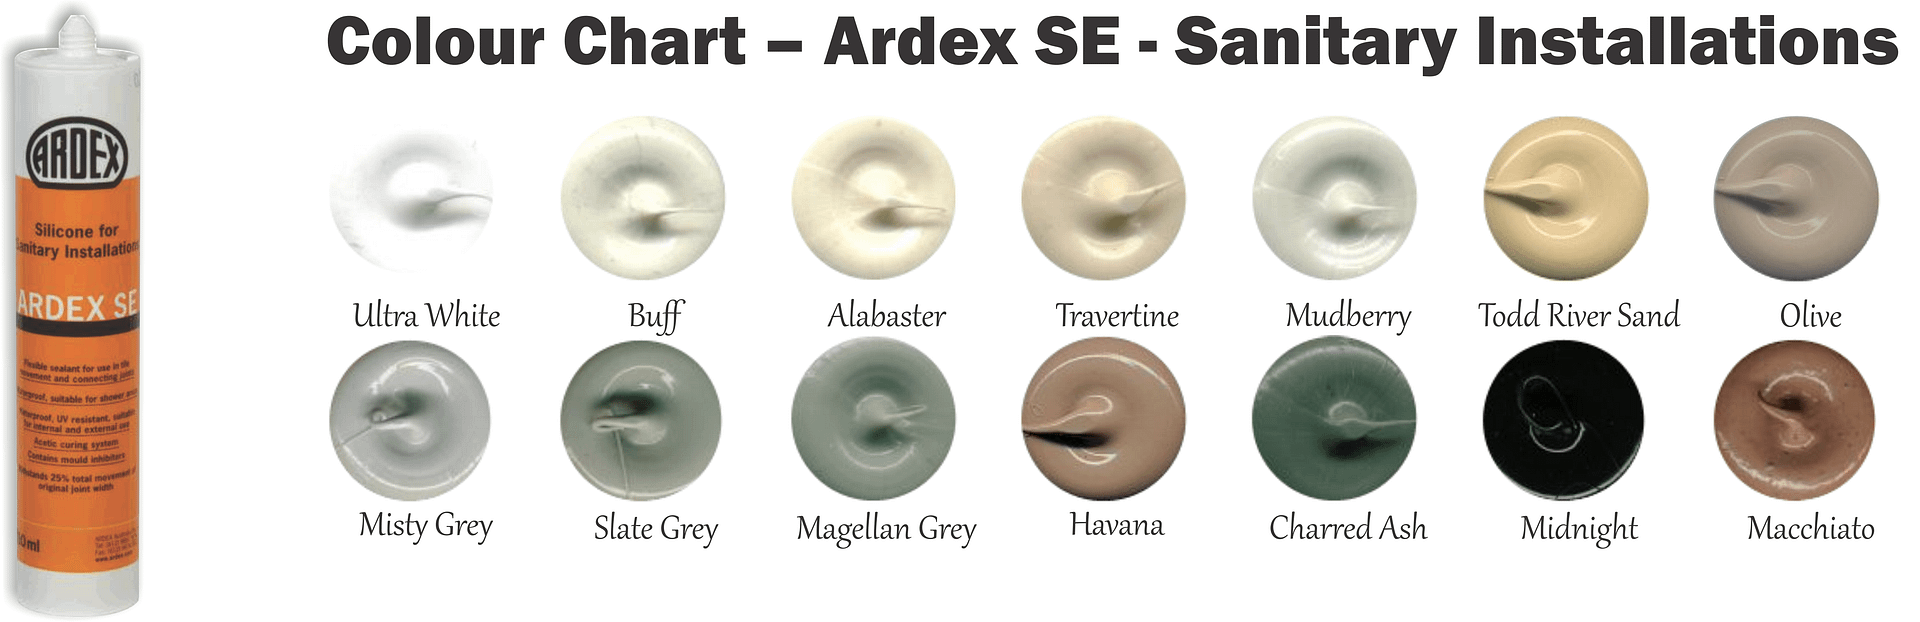 Colour Chart – Ardex SE – Sanitary Installations 